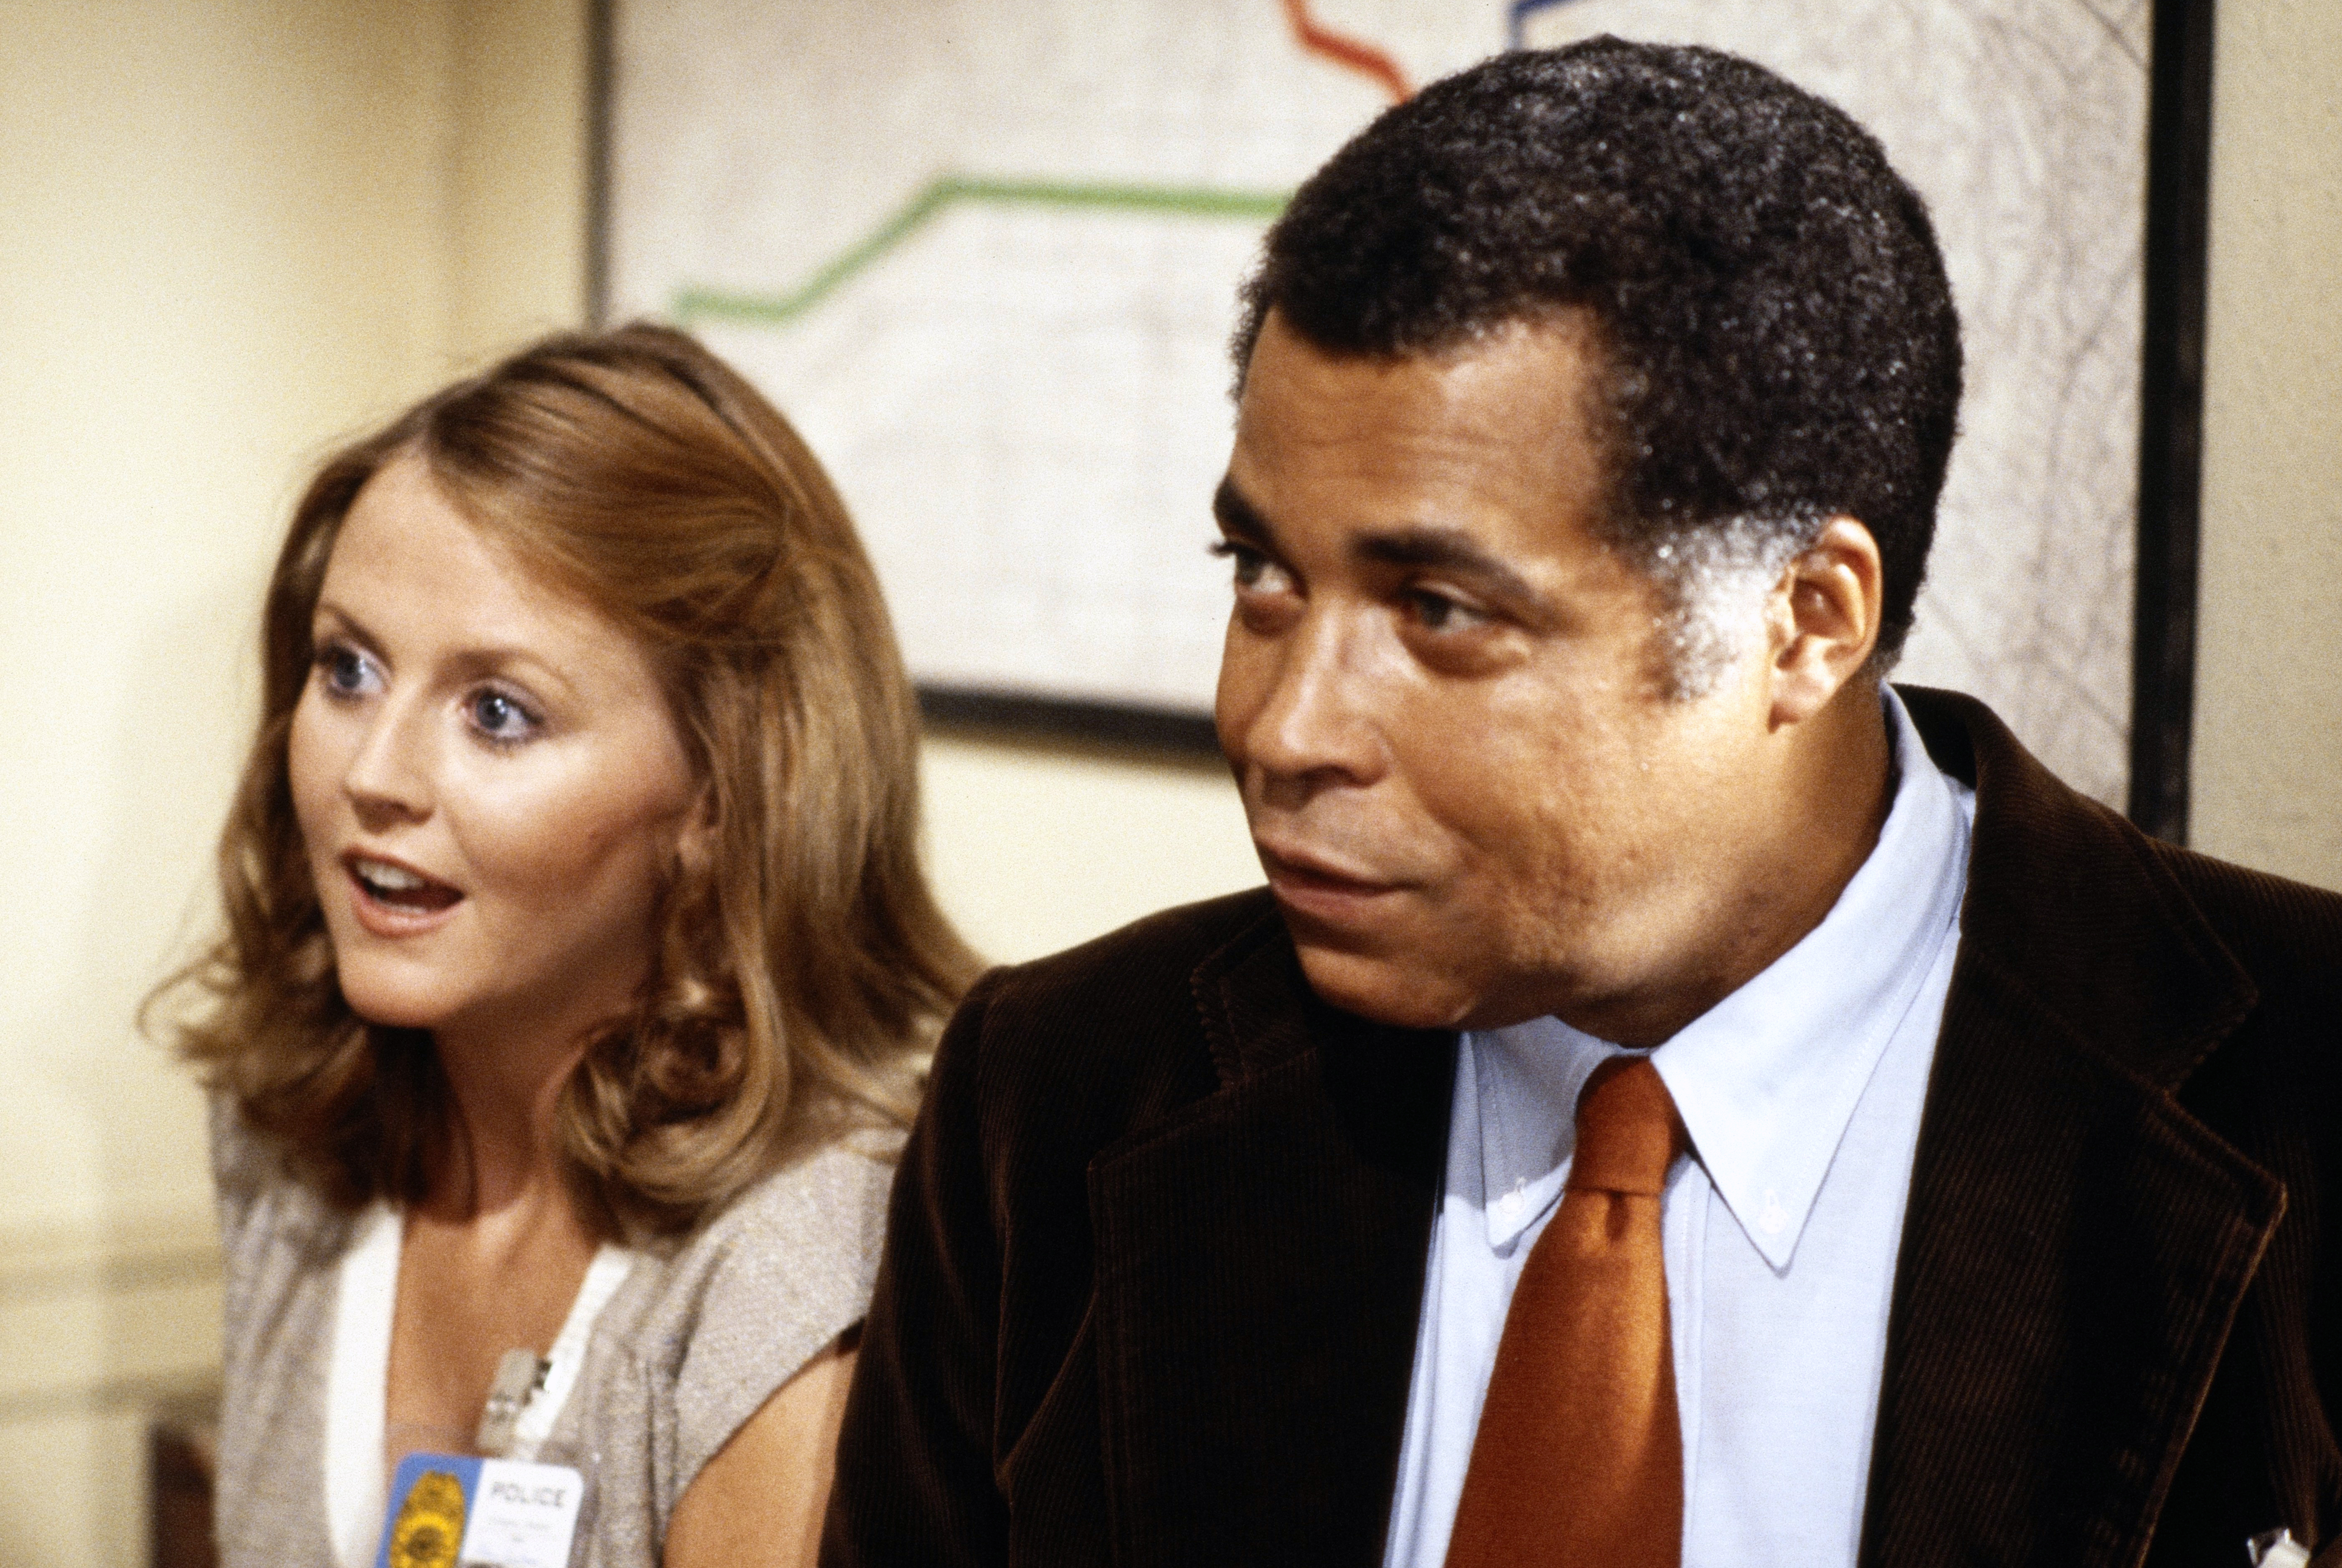 Cecilia Hart pictured as Stacey Erickson and James Earl Jones as Detective Capt. Woodrow 'Woody' Paris in the TV show "Paris." | Source: Getty Images